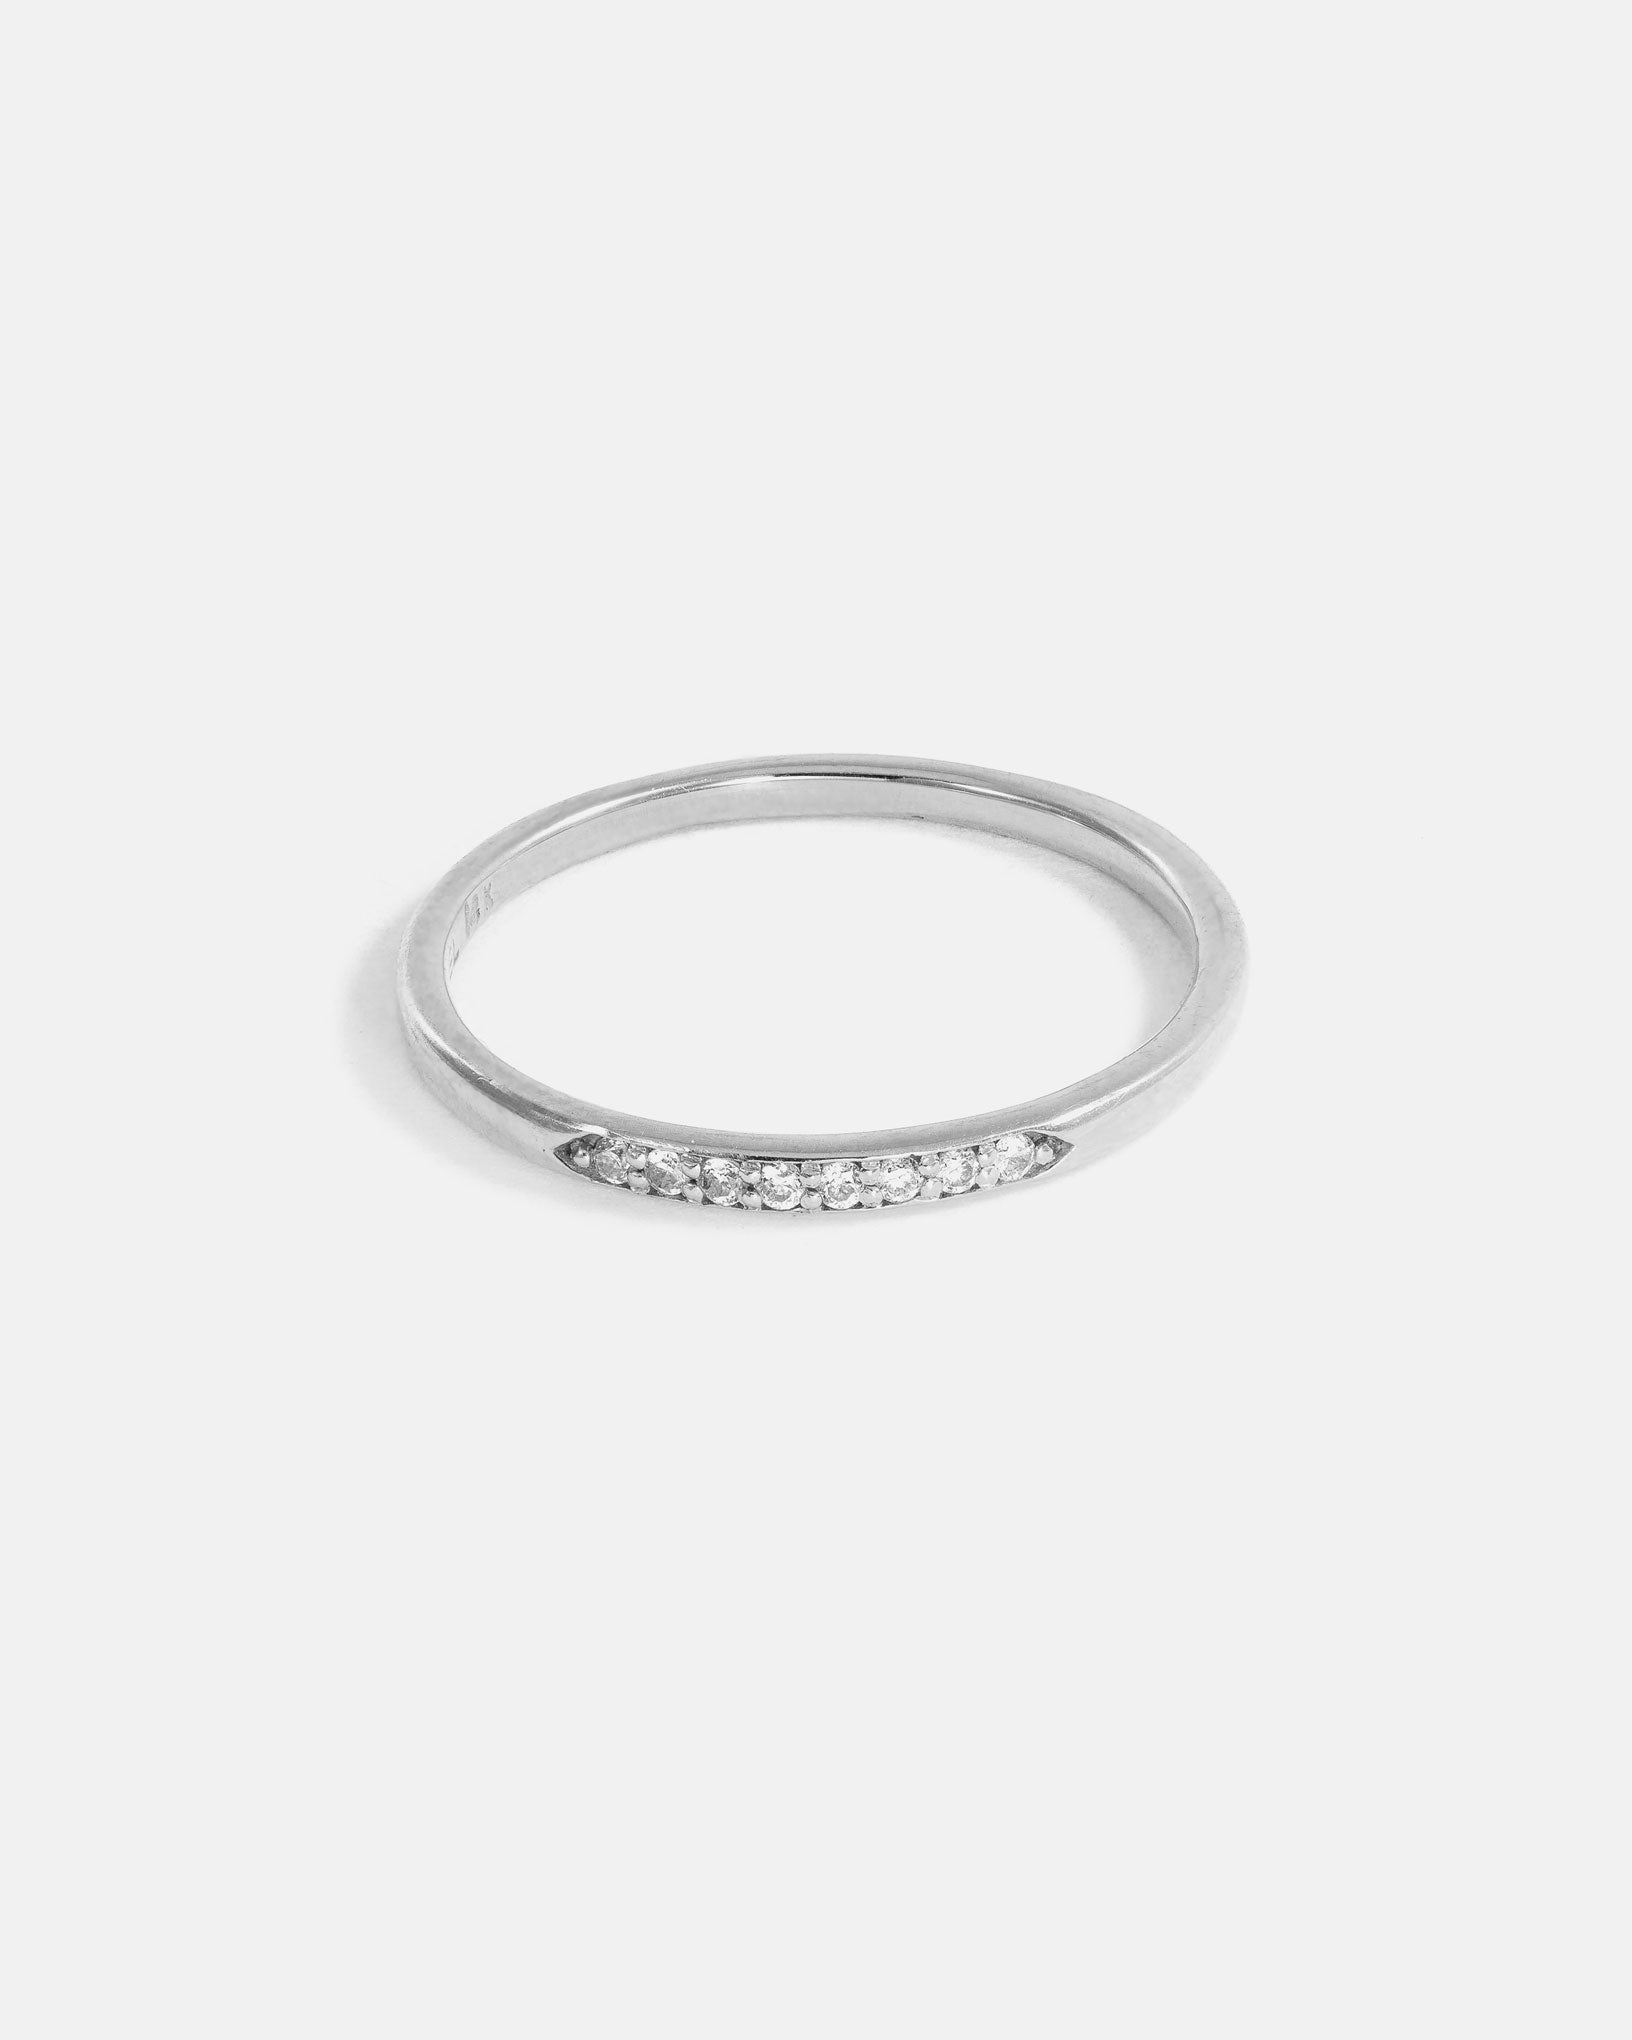 Stratura Wedding Ring in White Gold with Ethical Birthstones